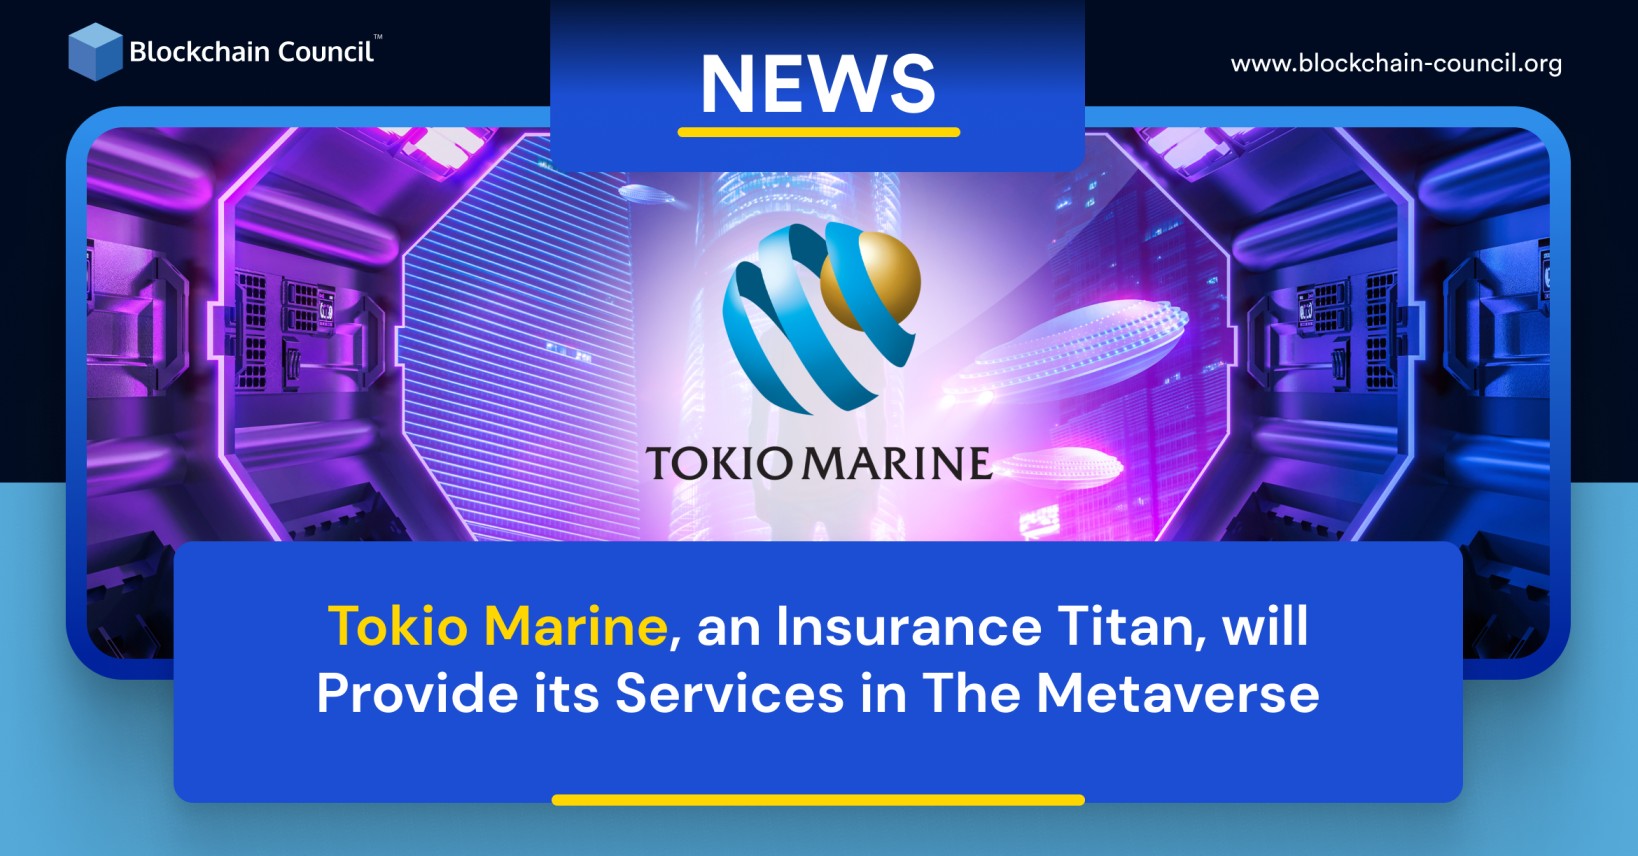 Tokio Marine, an Insurance Titan, will Provide its Services in The Metaverse